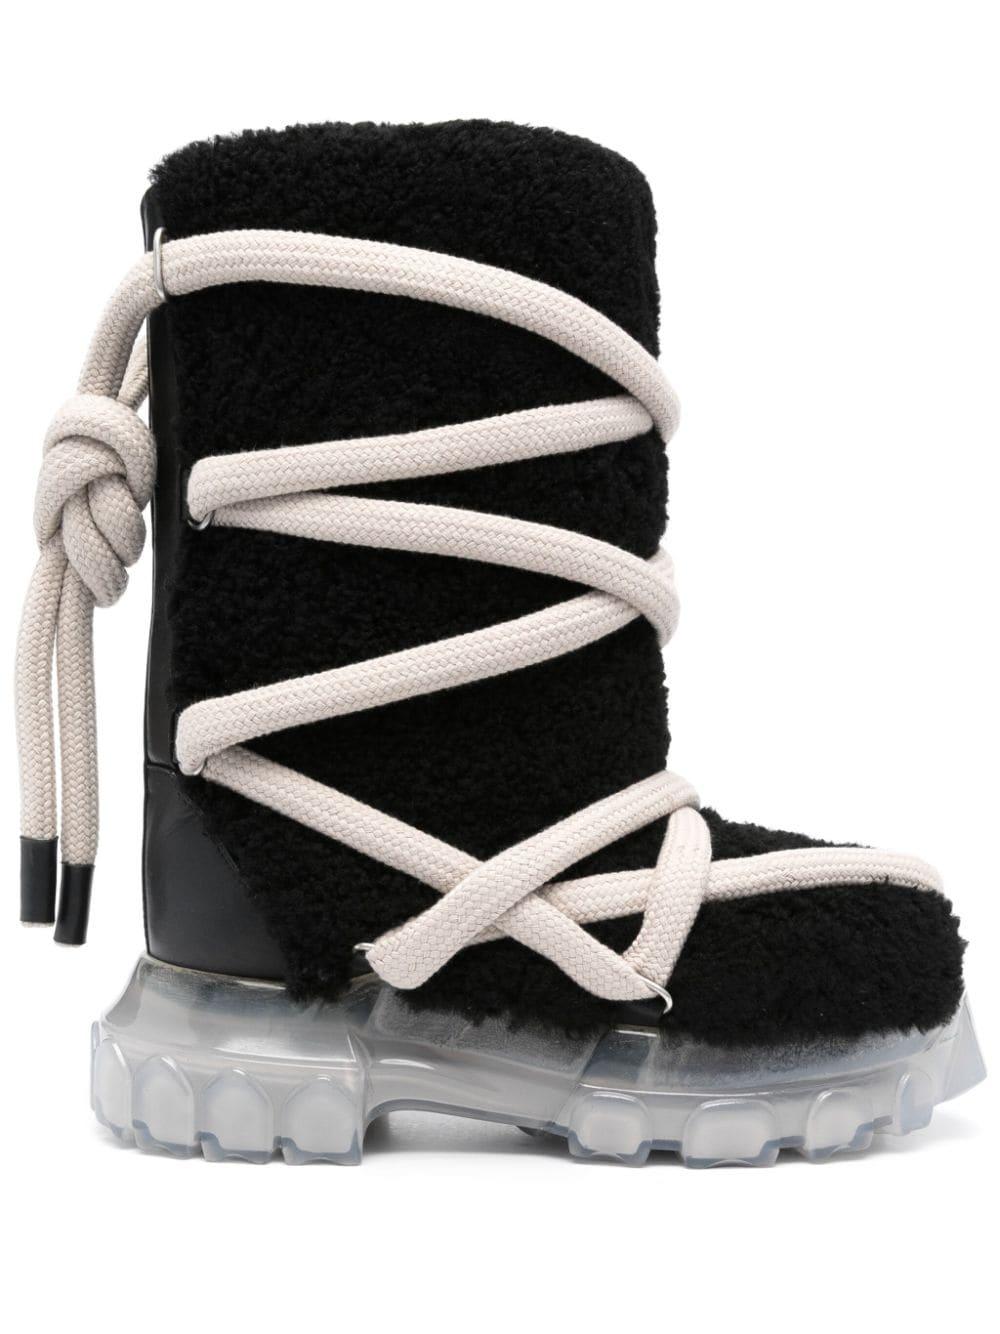 Rick Owens Lunar Tractor Calf-length Boots in Black | Lyst